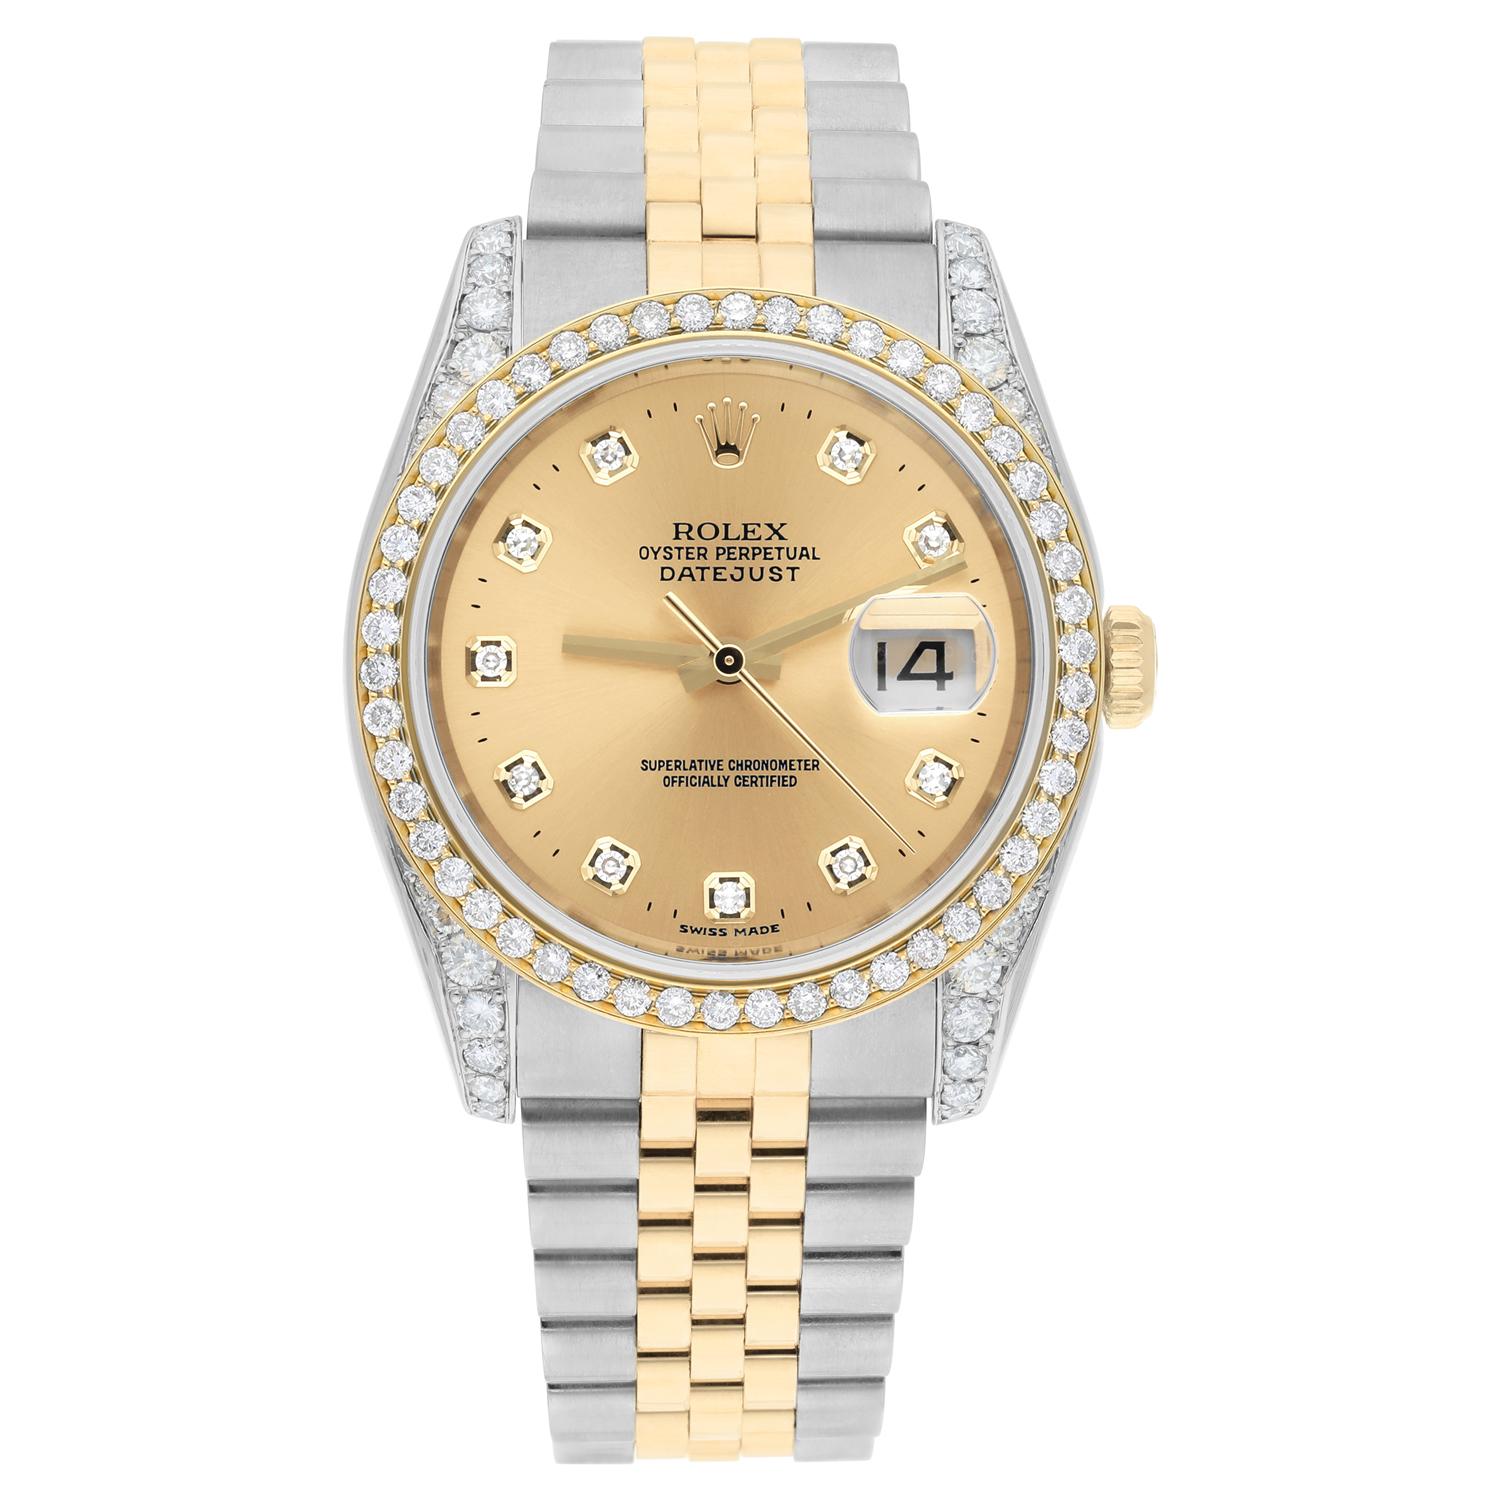 Rolex Datejust 36 Gold & Steel 116233 Watch Factory Champagne Diamond Dial  Custom Diamond Bezel, Diamond Lugs, Jubilee Bracelet Two Tone Watch 

This watch has been professionally polished, serviced and is in excellent overall condition. There are